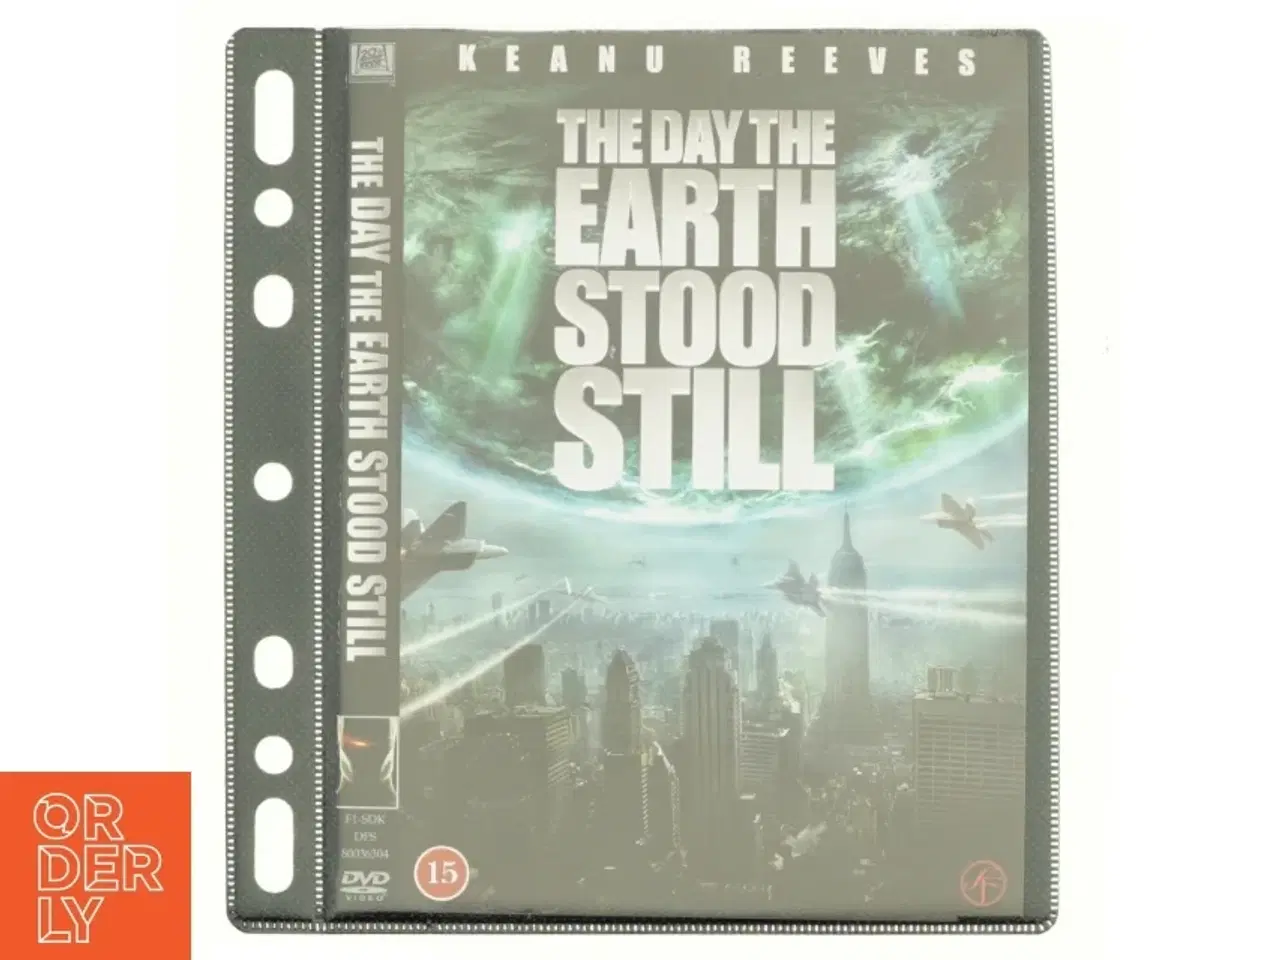 Billede 1 - THE DAY THE EARTH STOOD STILL (DVD)